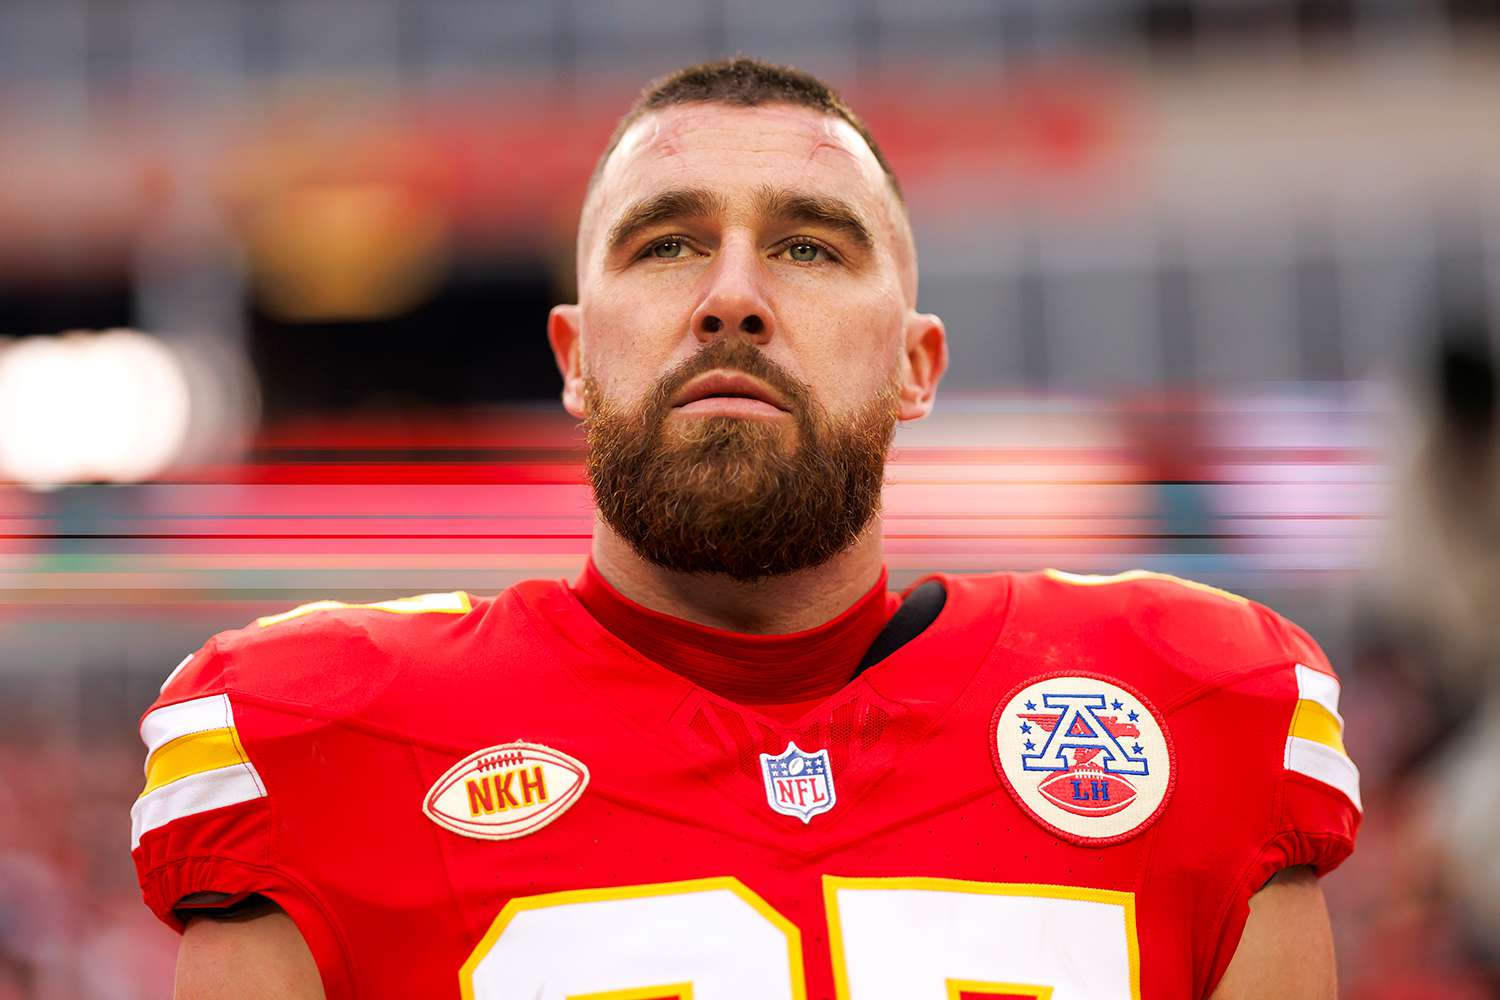 Sad News: Fans lost hope as Travis Kelce a key player of Kansas City Chiefs we no longer play due to…